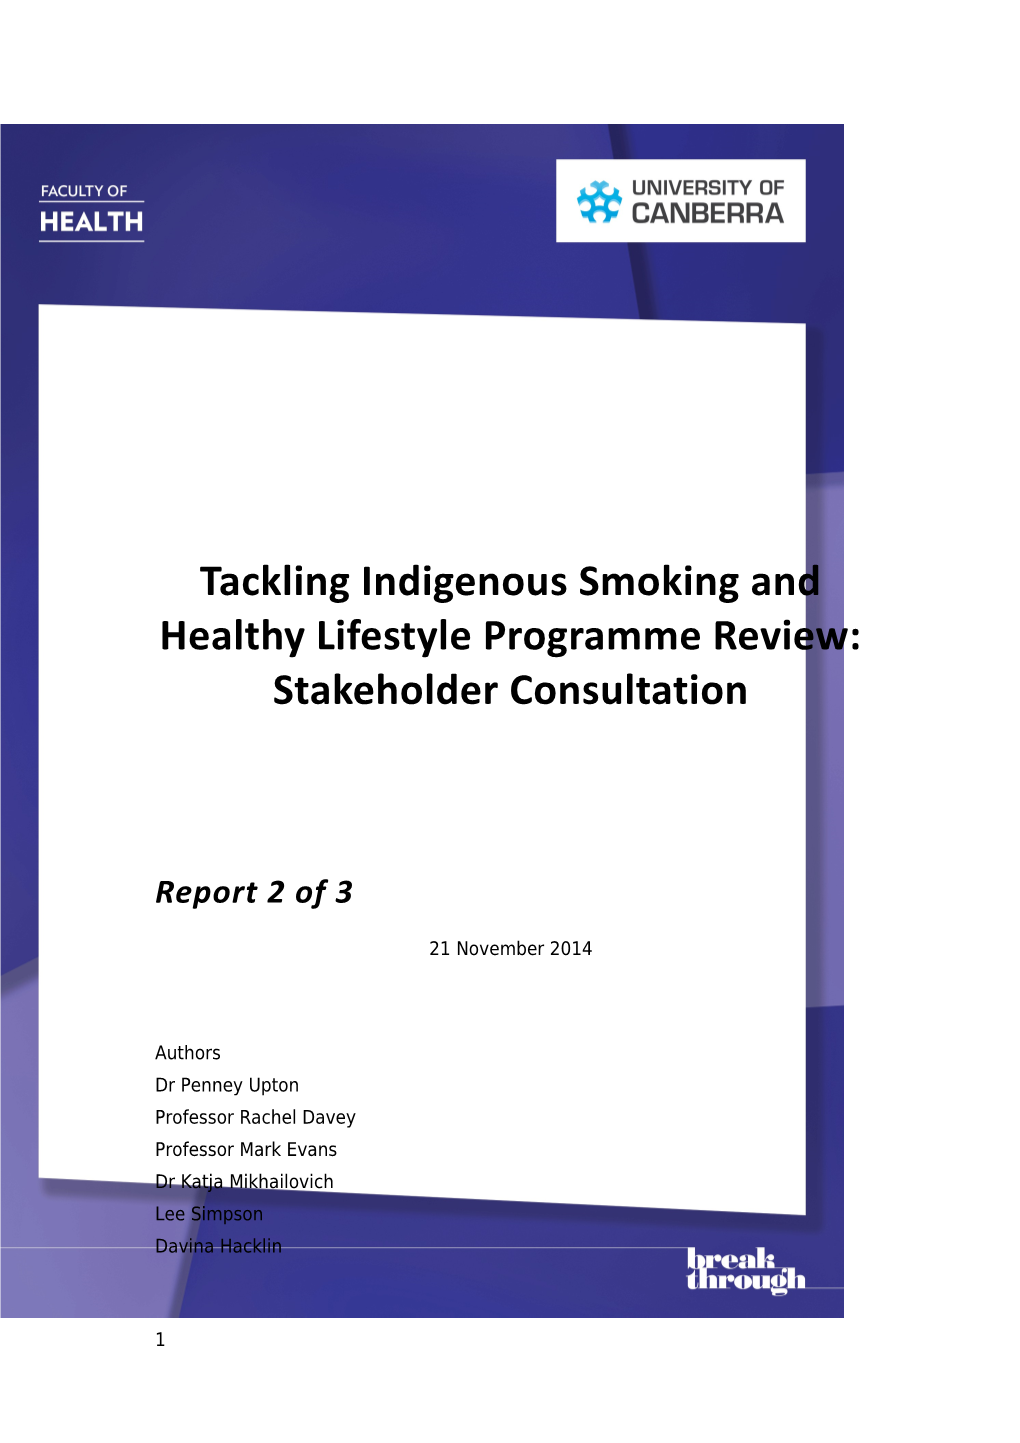 Tackling Indigenous Smoking and Healthy Lifestyle Programme Review: Stakeholder Consultation